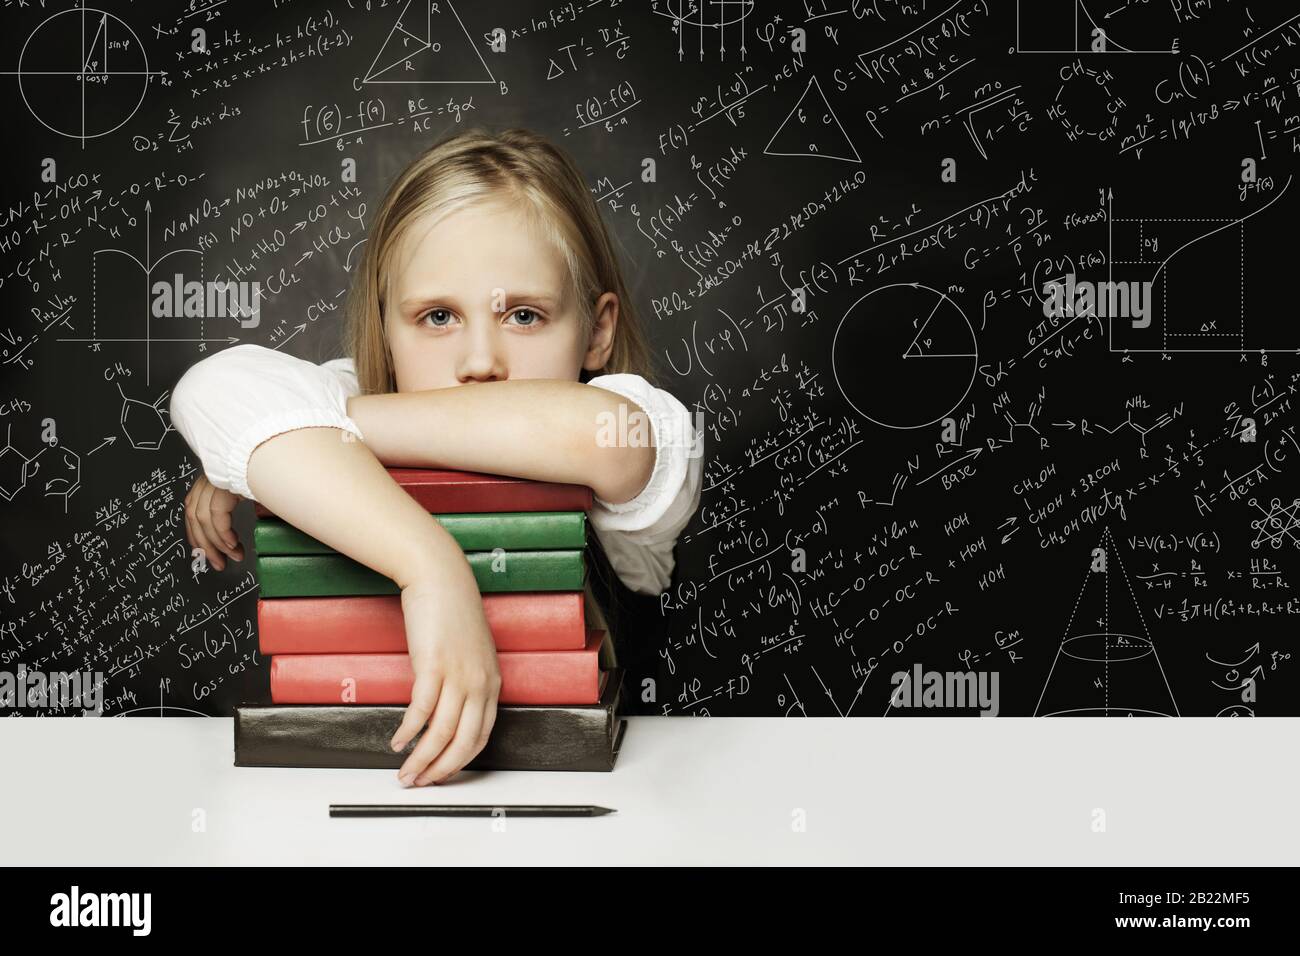 Tired child with books thinking on chalkboard with formulas Stock Photo